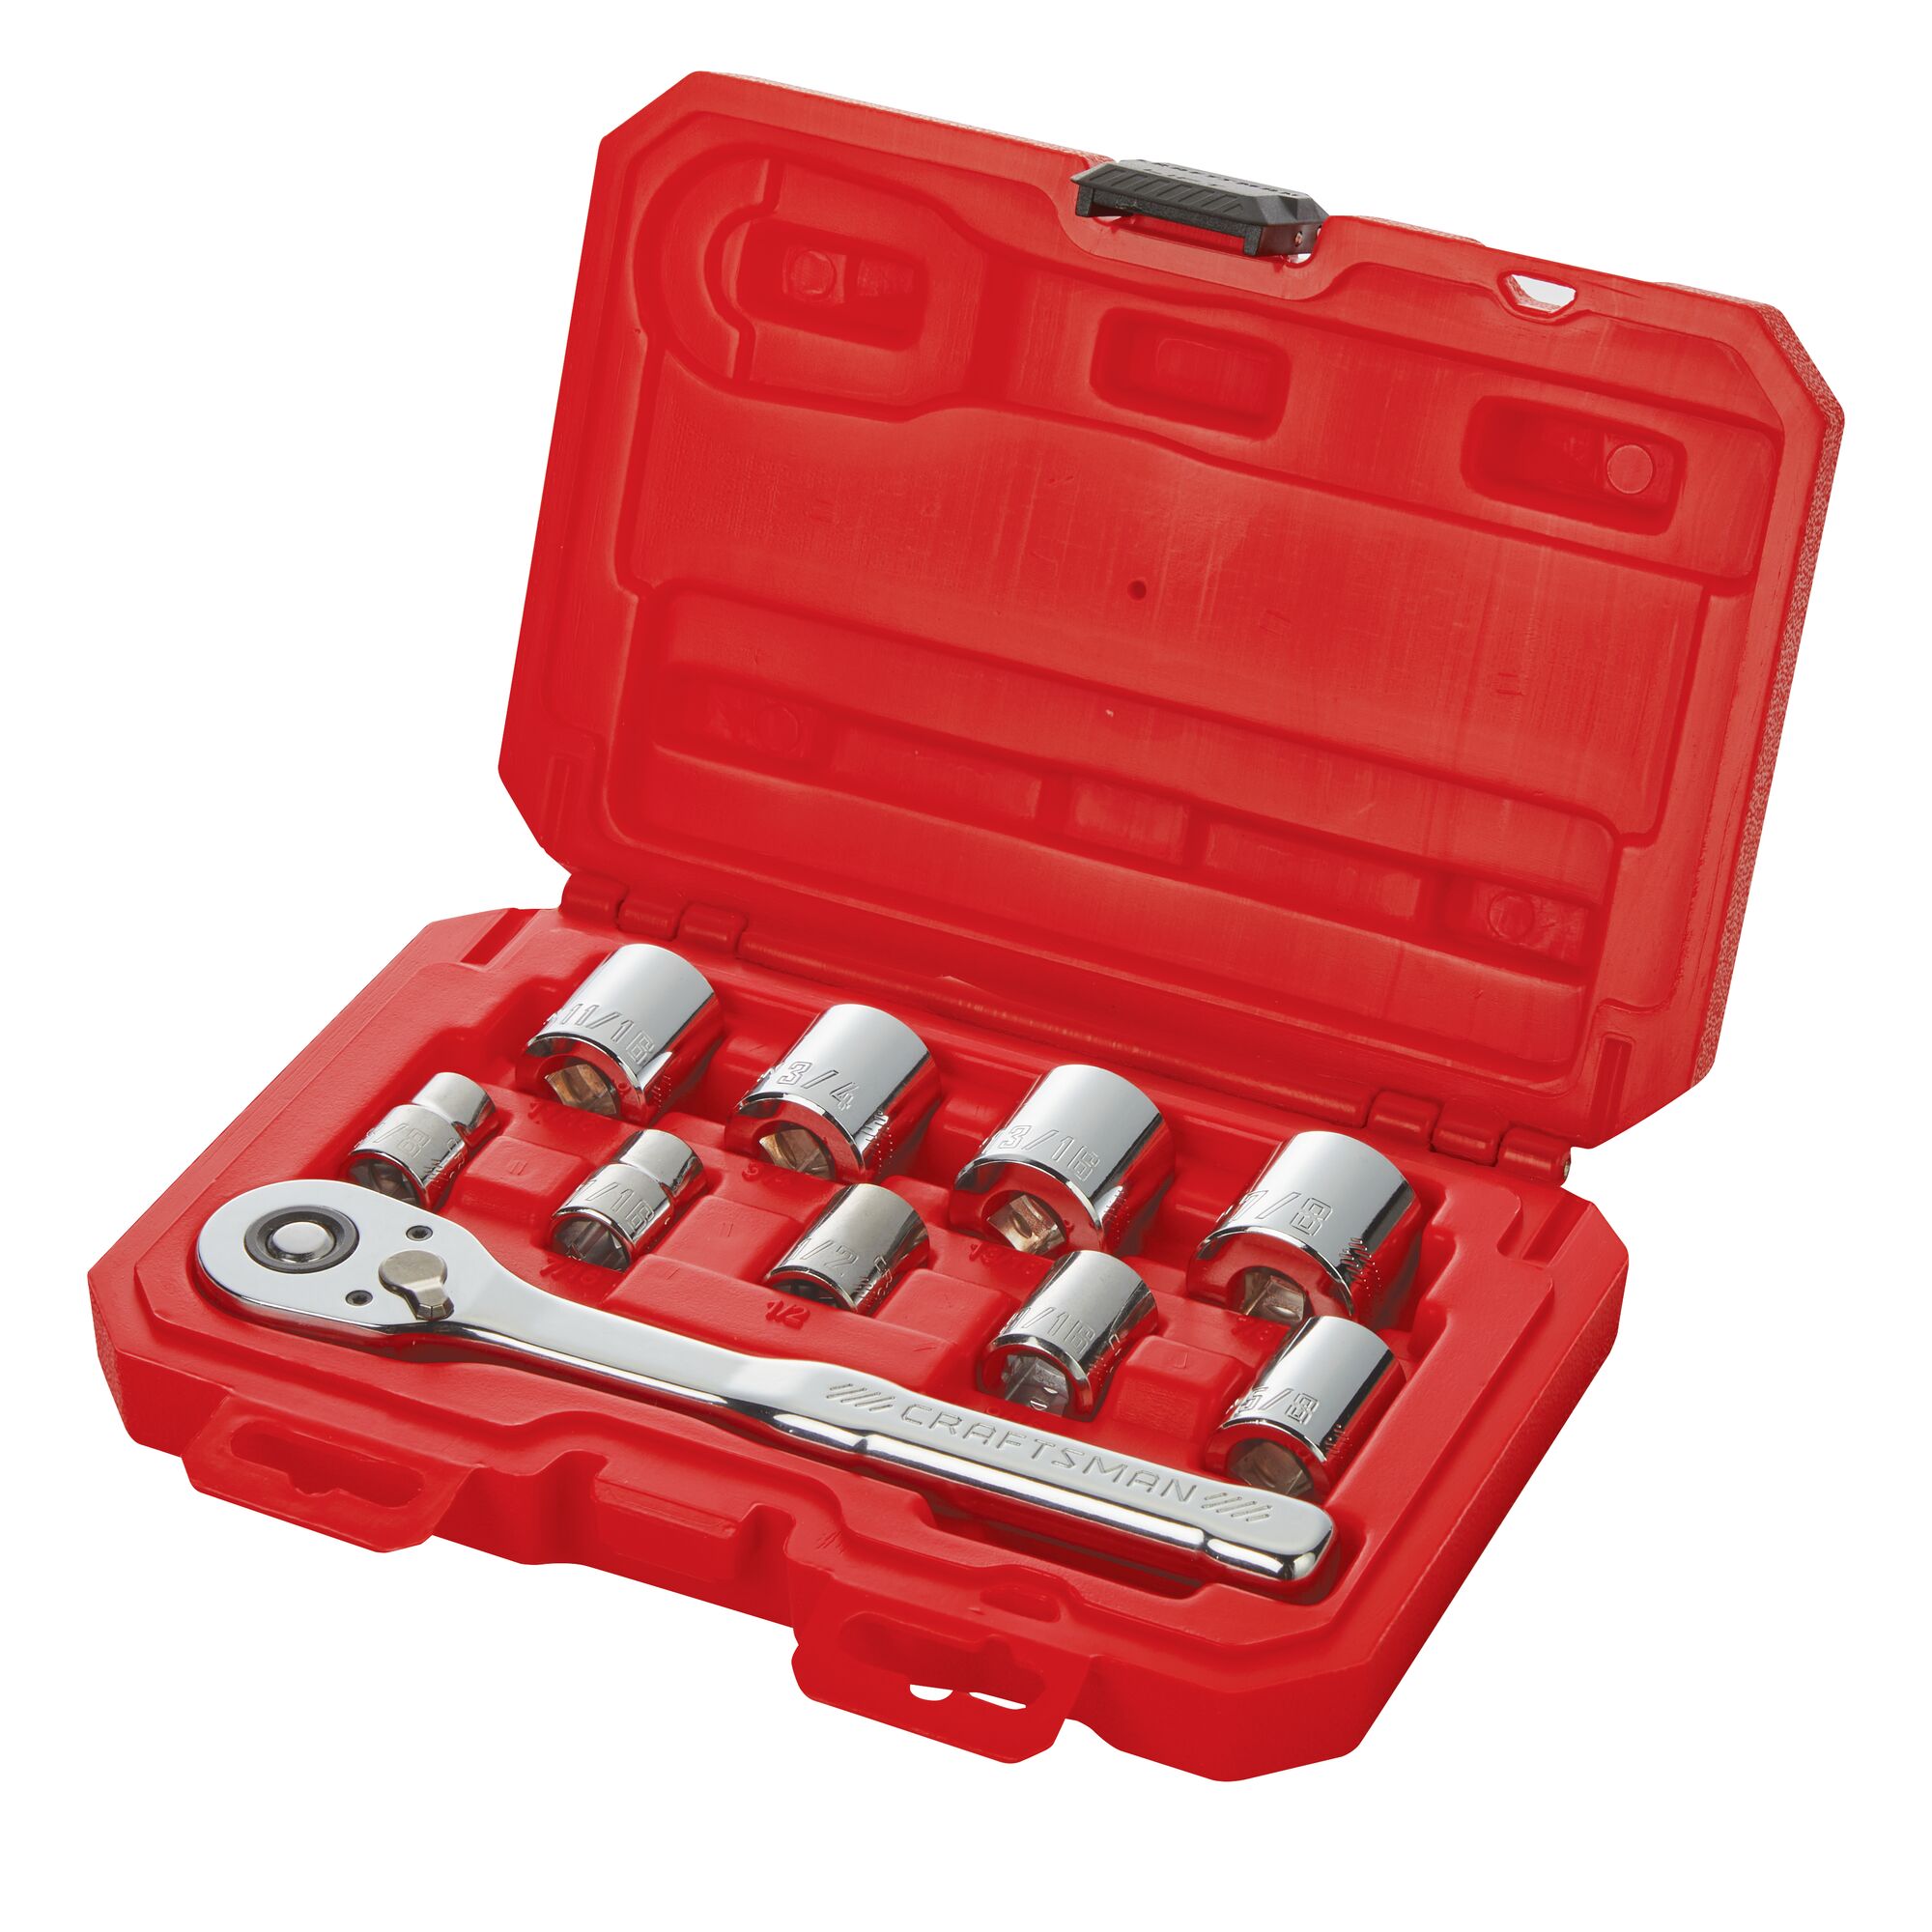 CRAFTSMAN 10 Piece 3/8 inch SAE Mechanics Tool Set in open red case